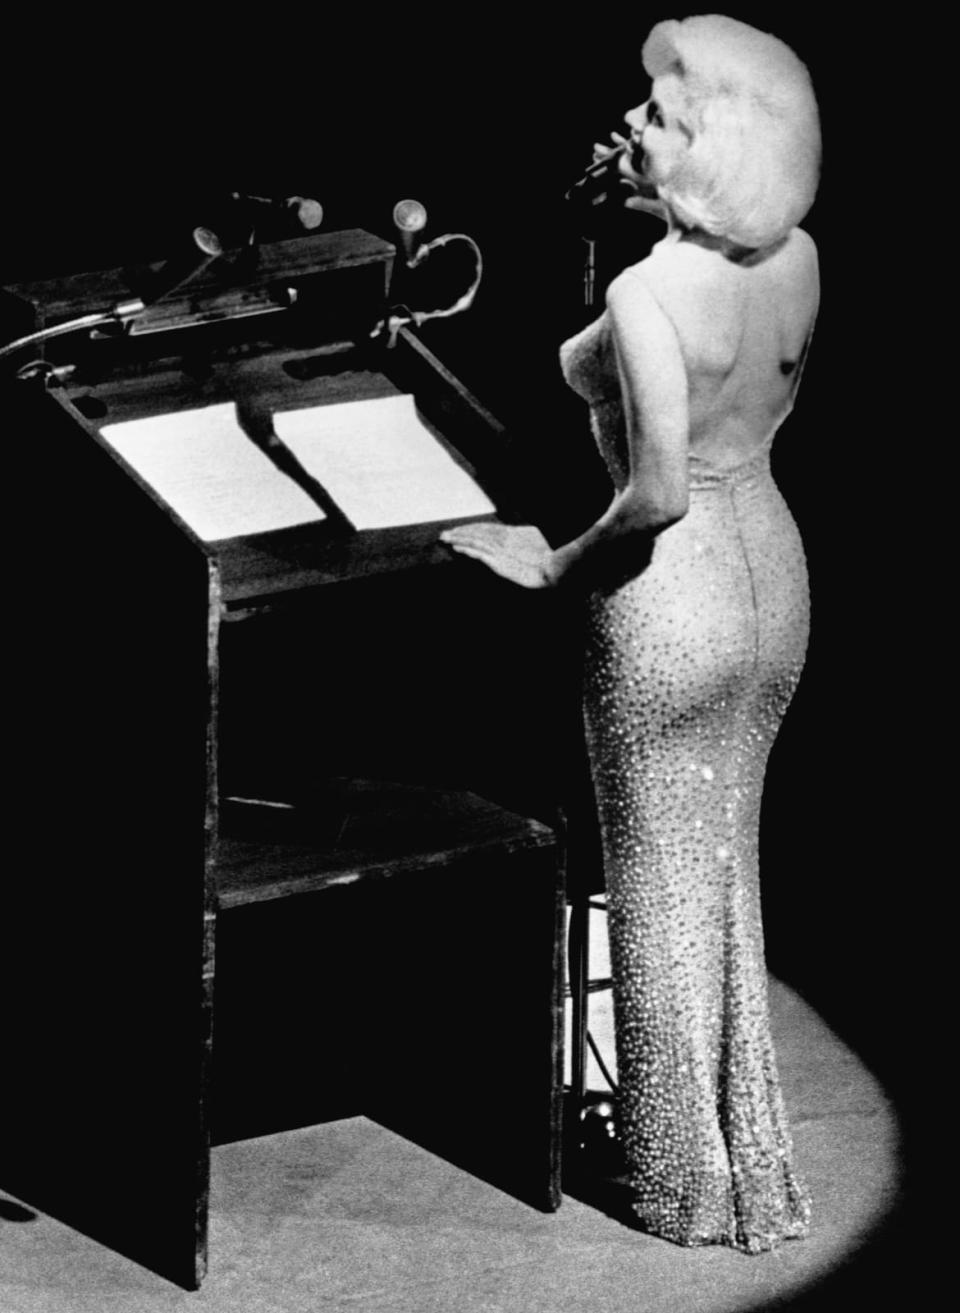 <div class="inline-image__caption"><p>Actress Marilyn Monroe sings "Happy Birthday" to President John F. Kennedy at Madison Square Garden.</p></div> <div class="inline-image__credit">Bettmann</div>